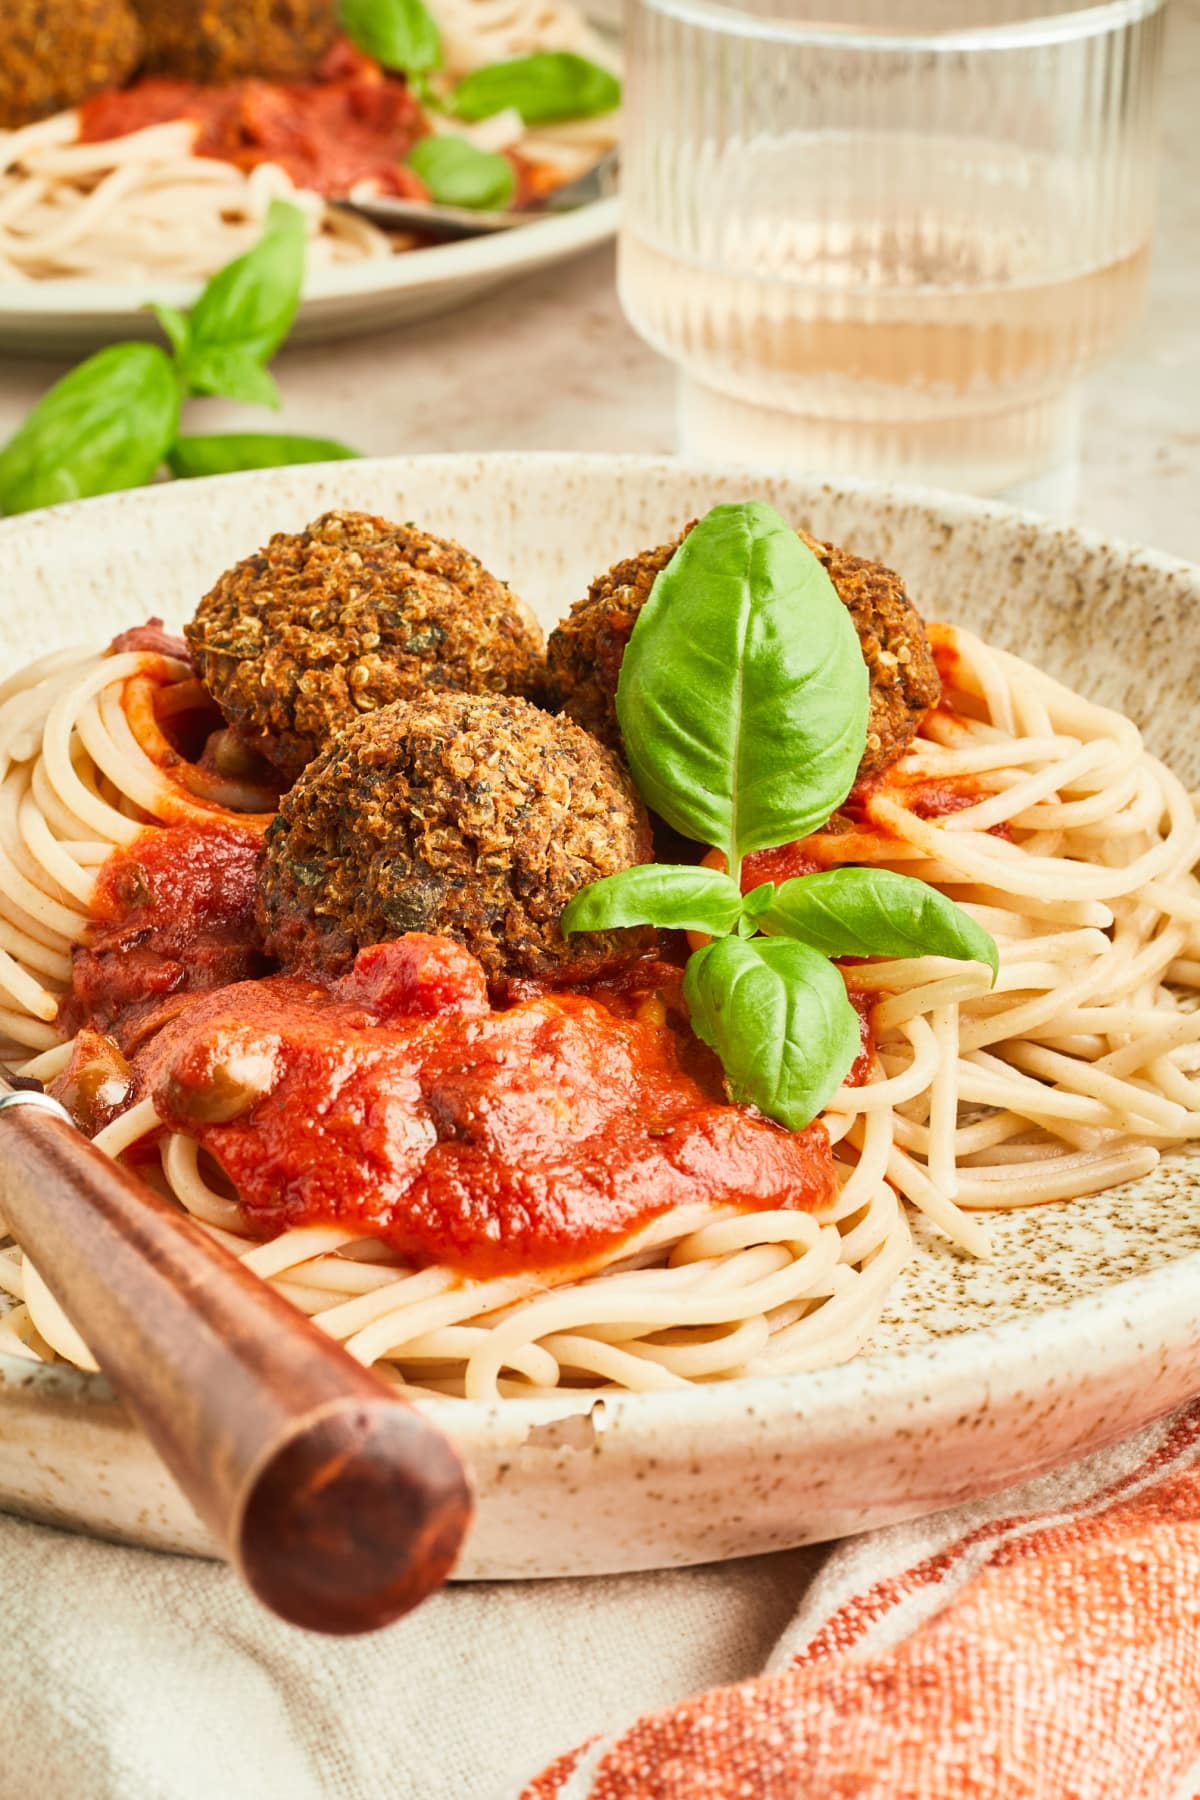 Three basil quinoa meatballs over spaghetti noodles with marinara sauce on a light beige rustic plate with a wood handled fork. Food is garnished with fresh basil, and the plate sits on a red and white striped cloth napkin. Another similar plate of food sits off focus in background with a glass of white vwine.